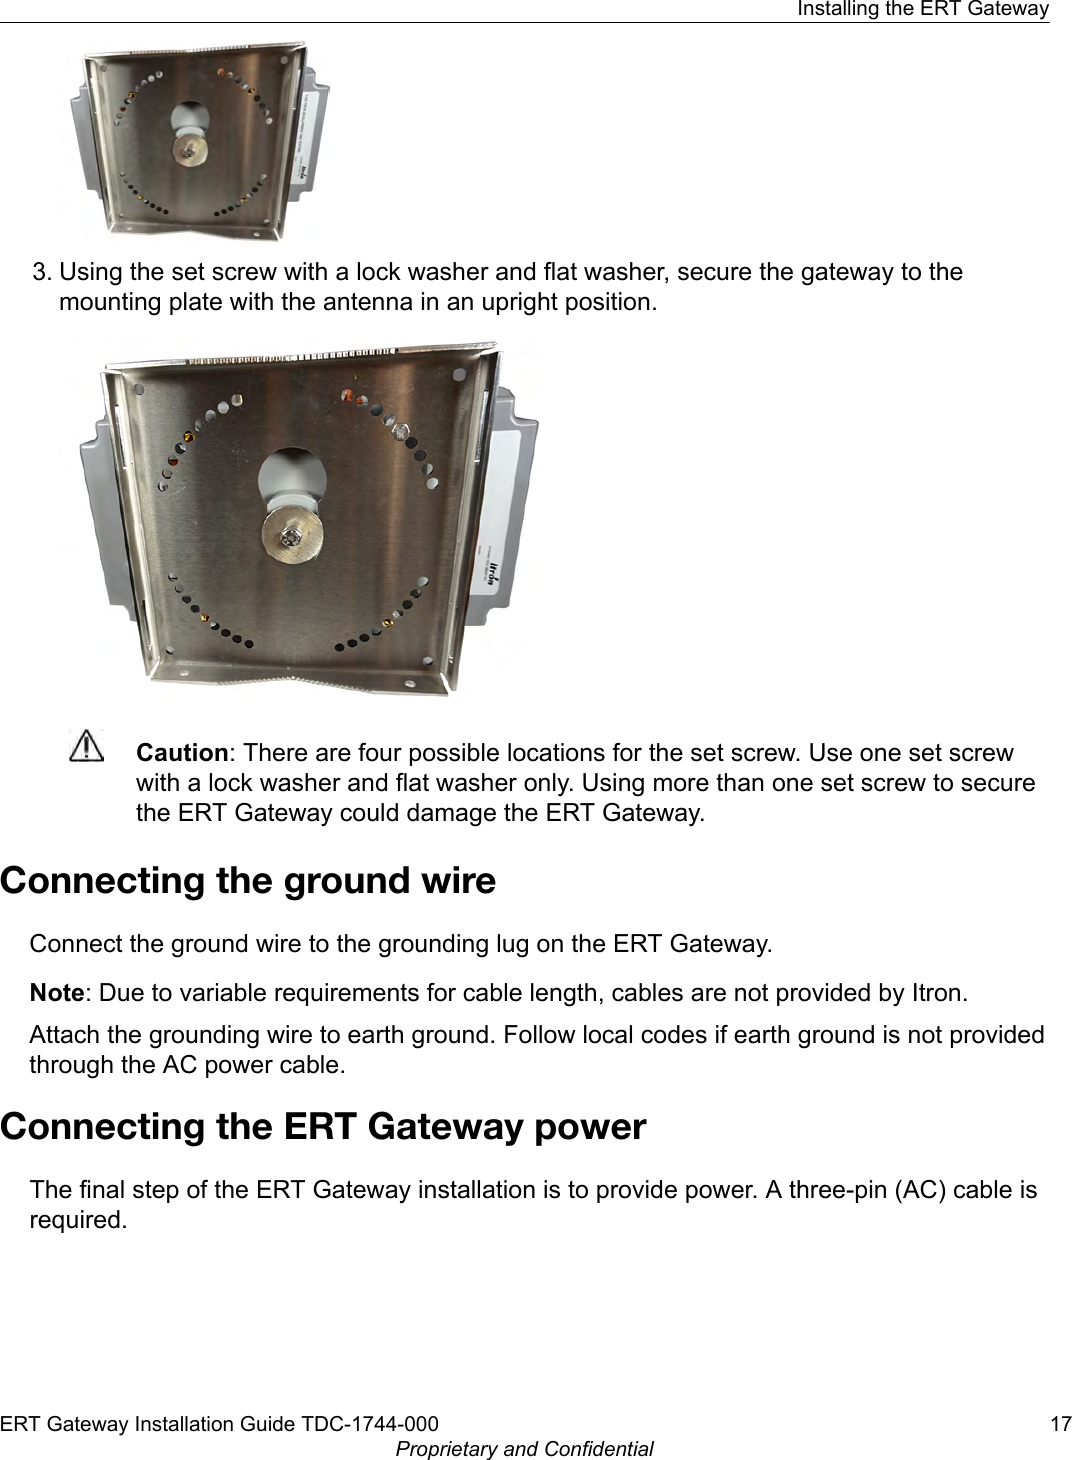 3. Using the set screw with a lock washer and flat washer, secure the gateway to themounting plate with the antenna in an upright position.Caution: There are four possible locations for the set screw. Use one set screwwith a lock washer and flat washer only. Using more than one set screw to securethe ERT Gateway could damage the ERT Gateway.Connecting the ground wireConnect the ground wire to the grounding lug on the ERT Gateway.Note: Due to variable requirements for cable length, cables are not provided by Itron.Attach the grounding wire to earth ground. Follow local codes if earth ground is not providedthrough the AC power cable.Connecting the ERT Gateway powerThe final step of the ERT Gateway installation is to provide power. A three-pin (AC) cable isrequired.Installing the ERT GatewayERT Gateway Installation Guide TDC-1744-000 17Proprietary and Confidential